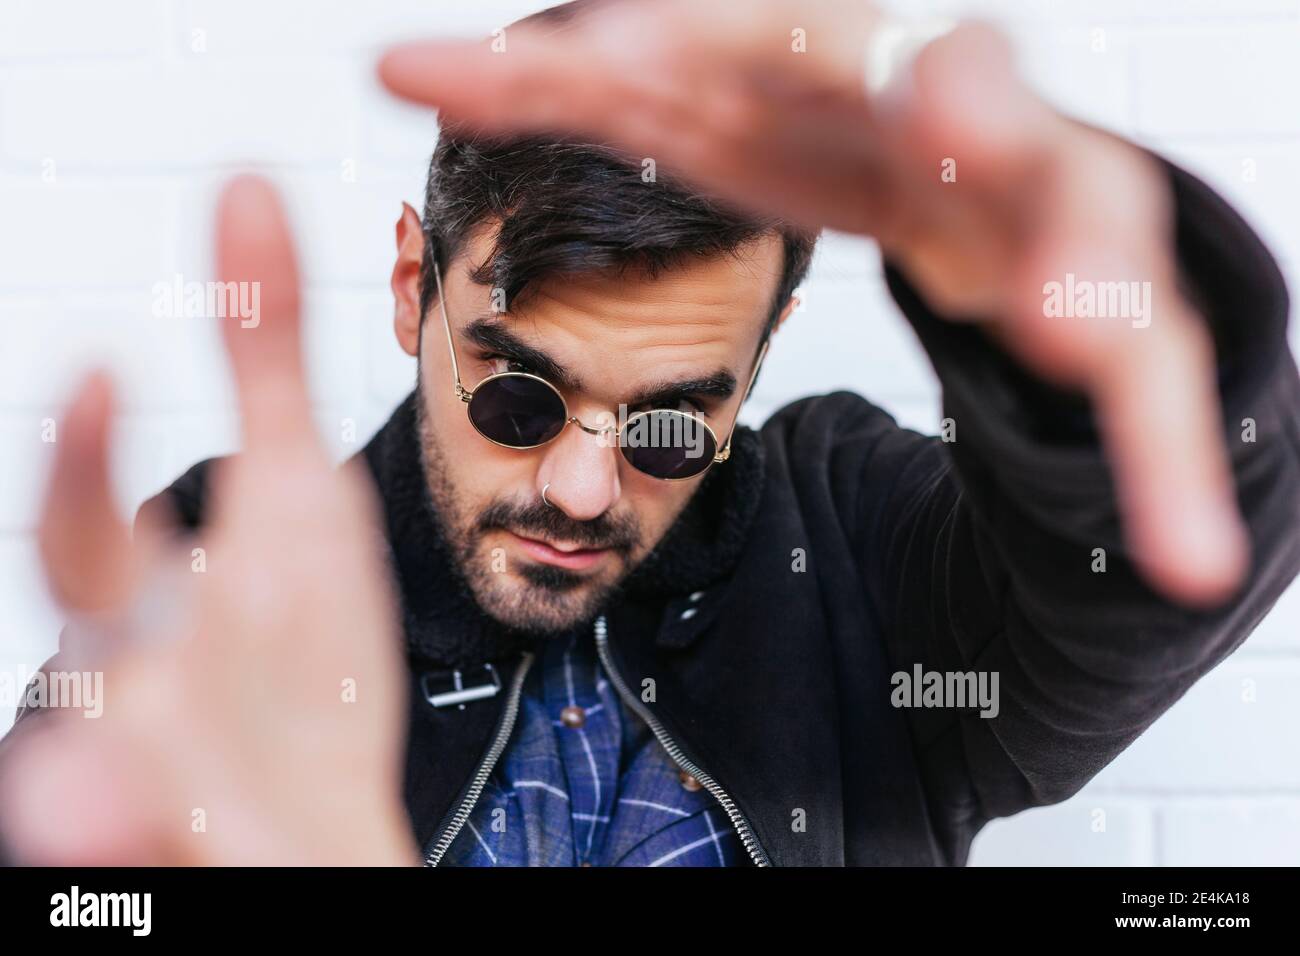 Fashionable young man wearing nose ring gesturing against white wall Stock Photo